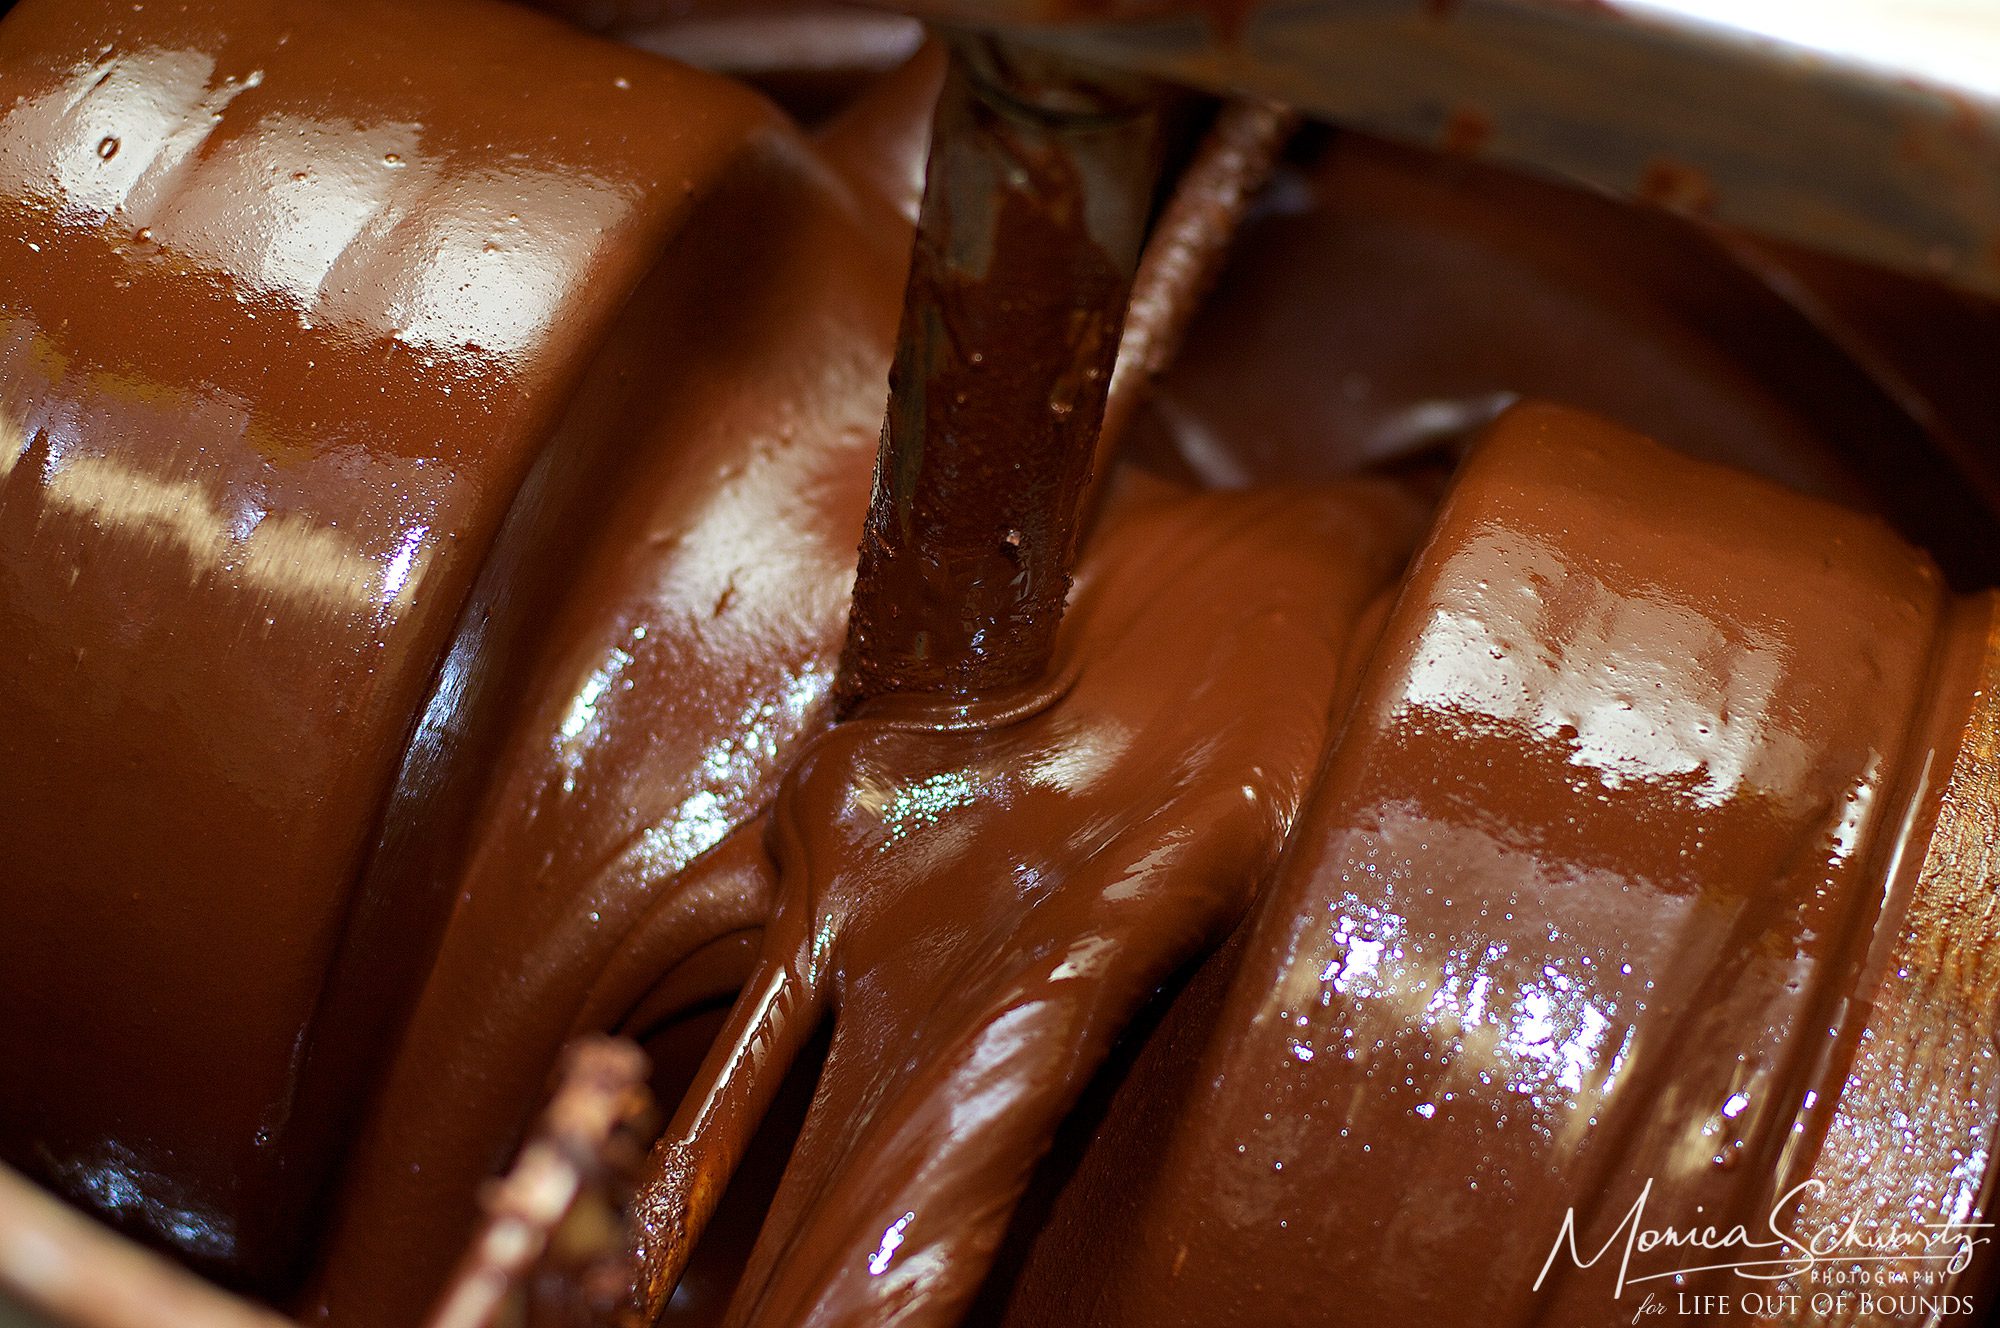 Churning-the-ingredients-to-blend-the-chocolate-at-Madre-Chocolate-Oahu-Hawaii